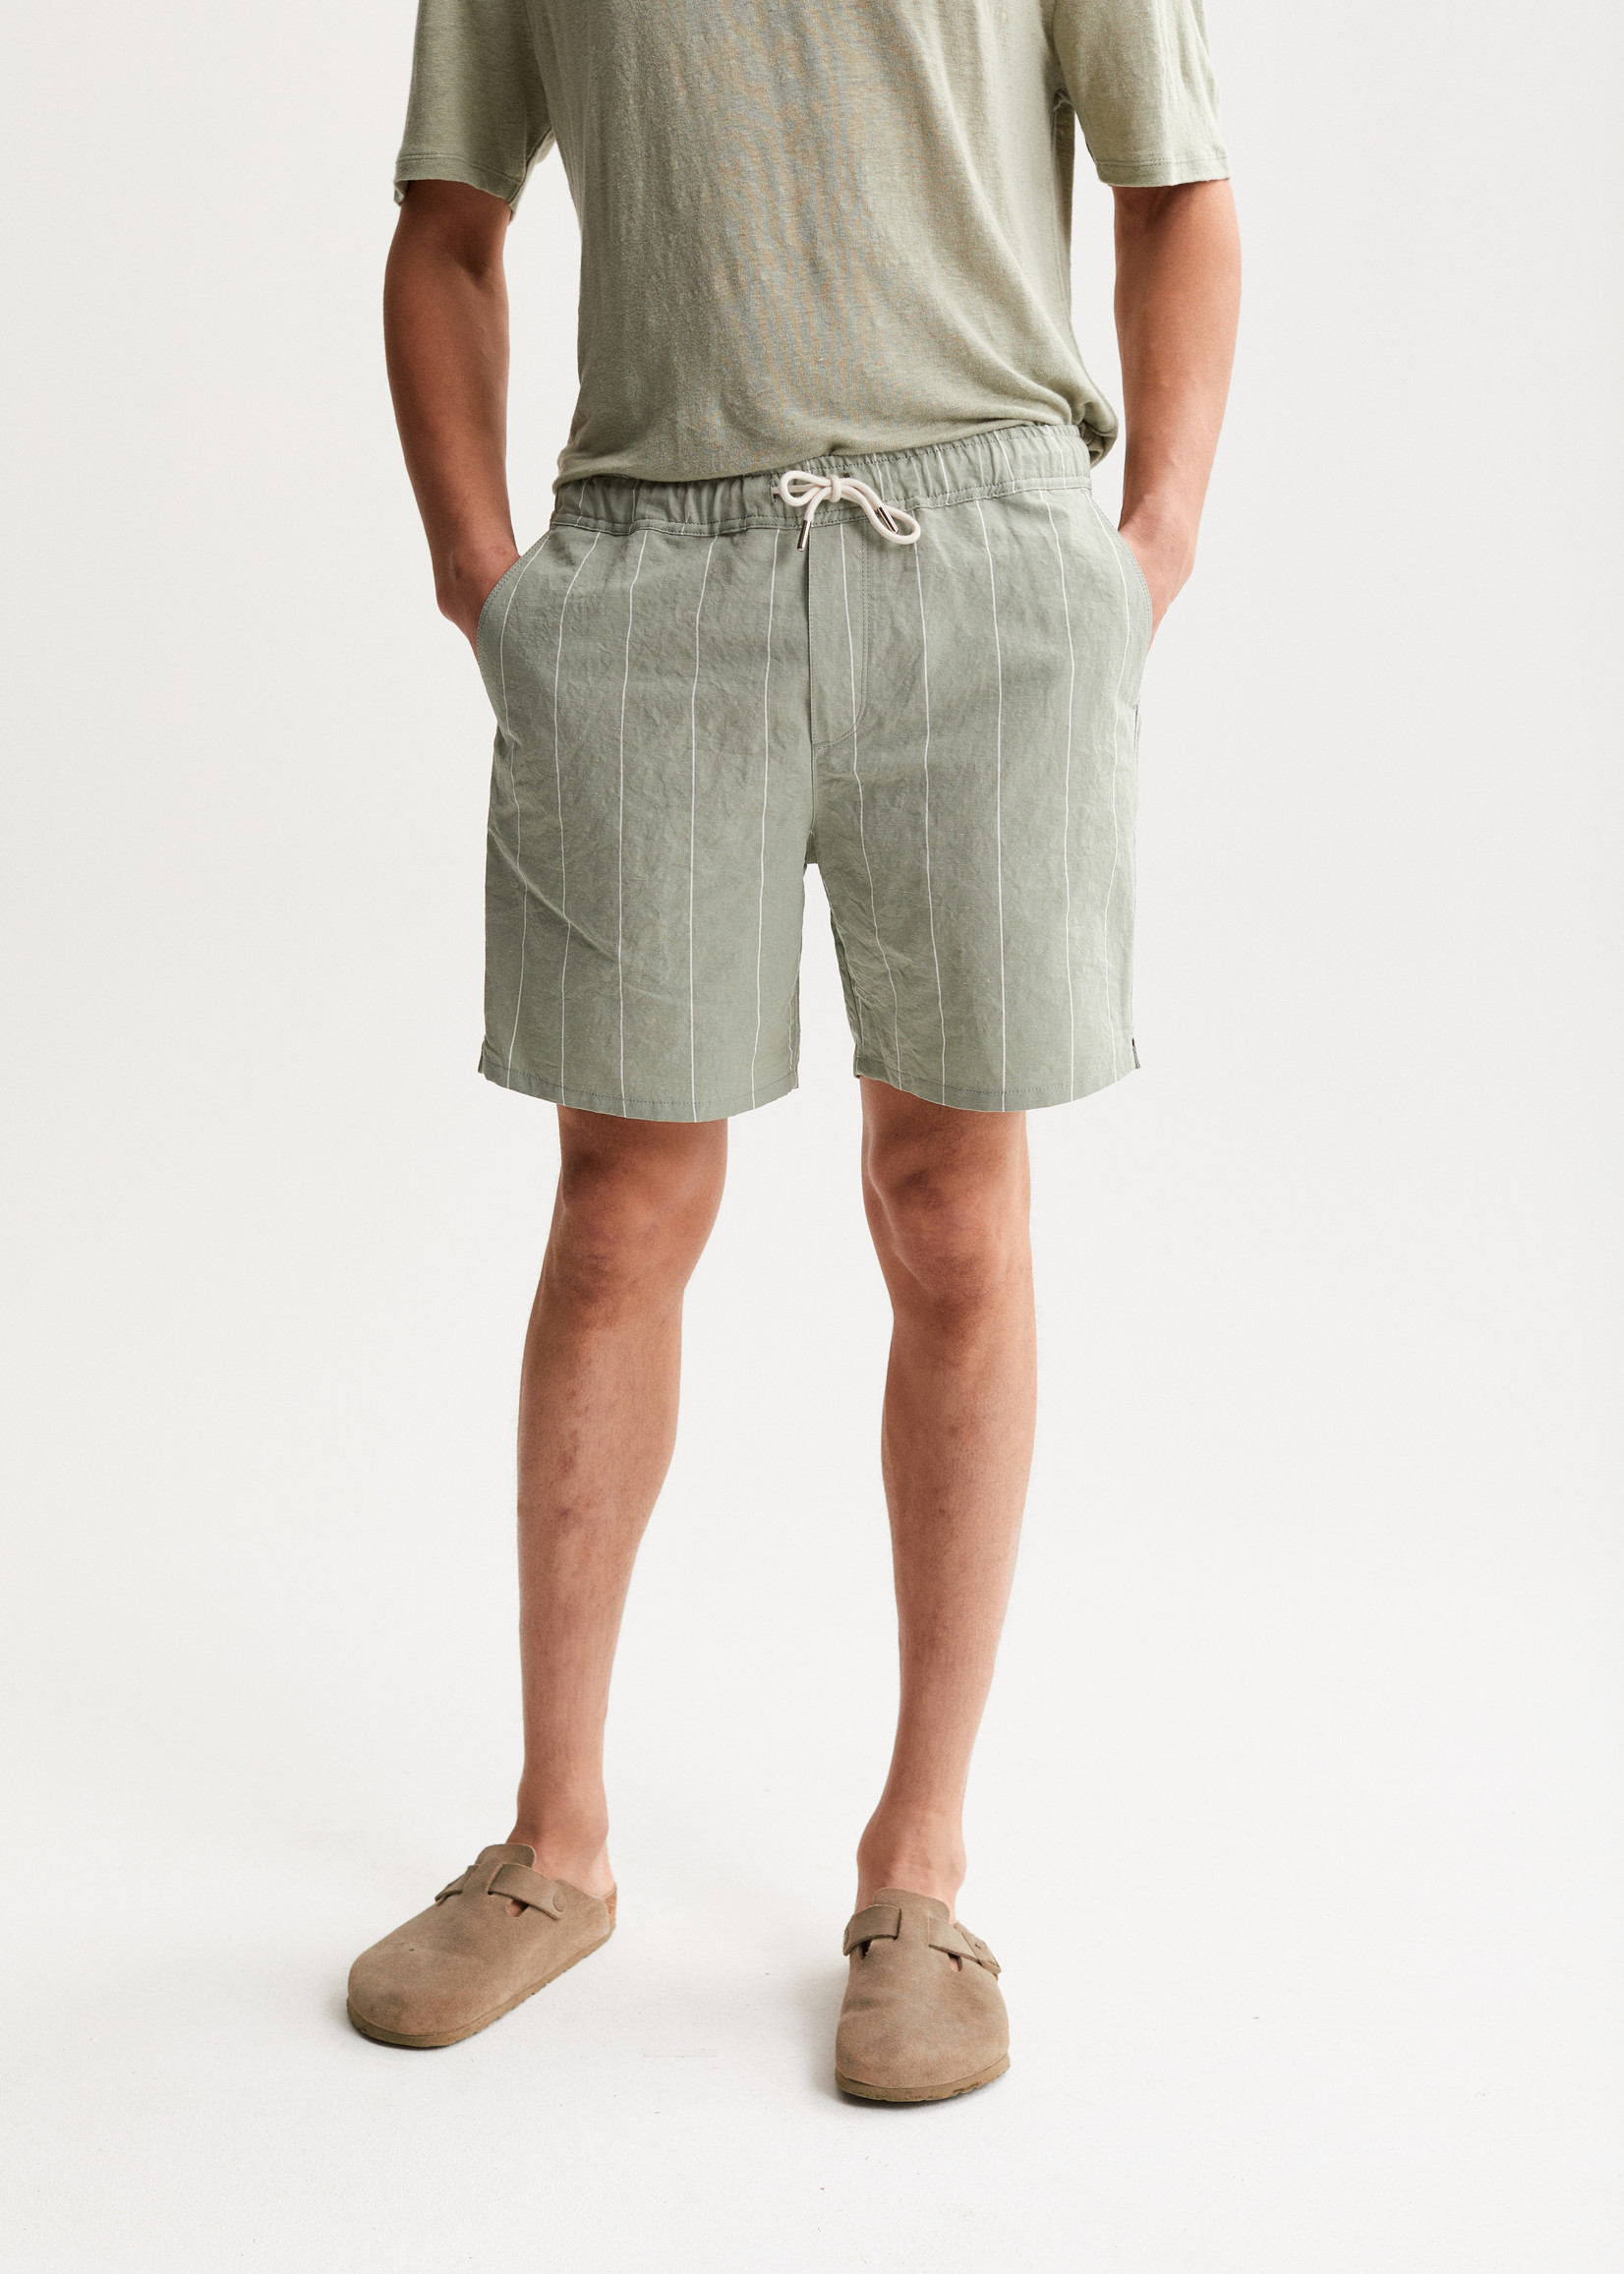 The GoodPeople Hyper Shorts